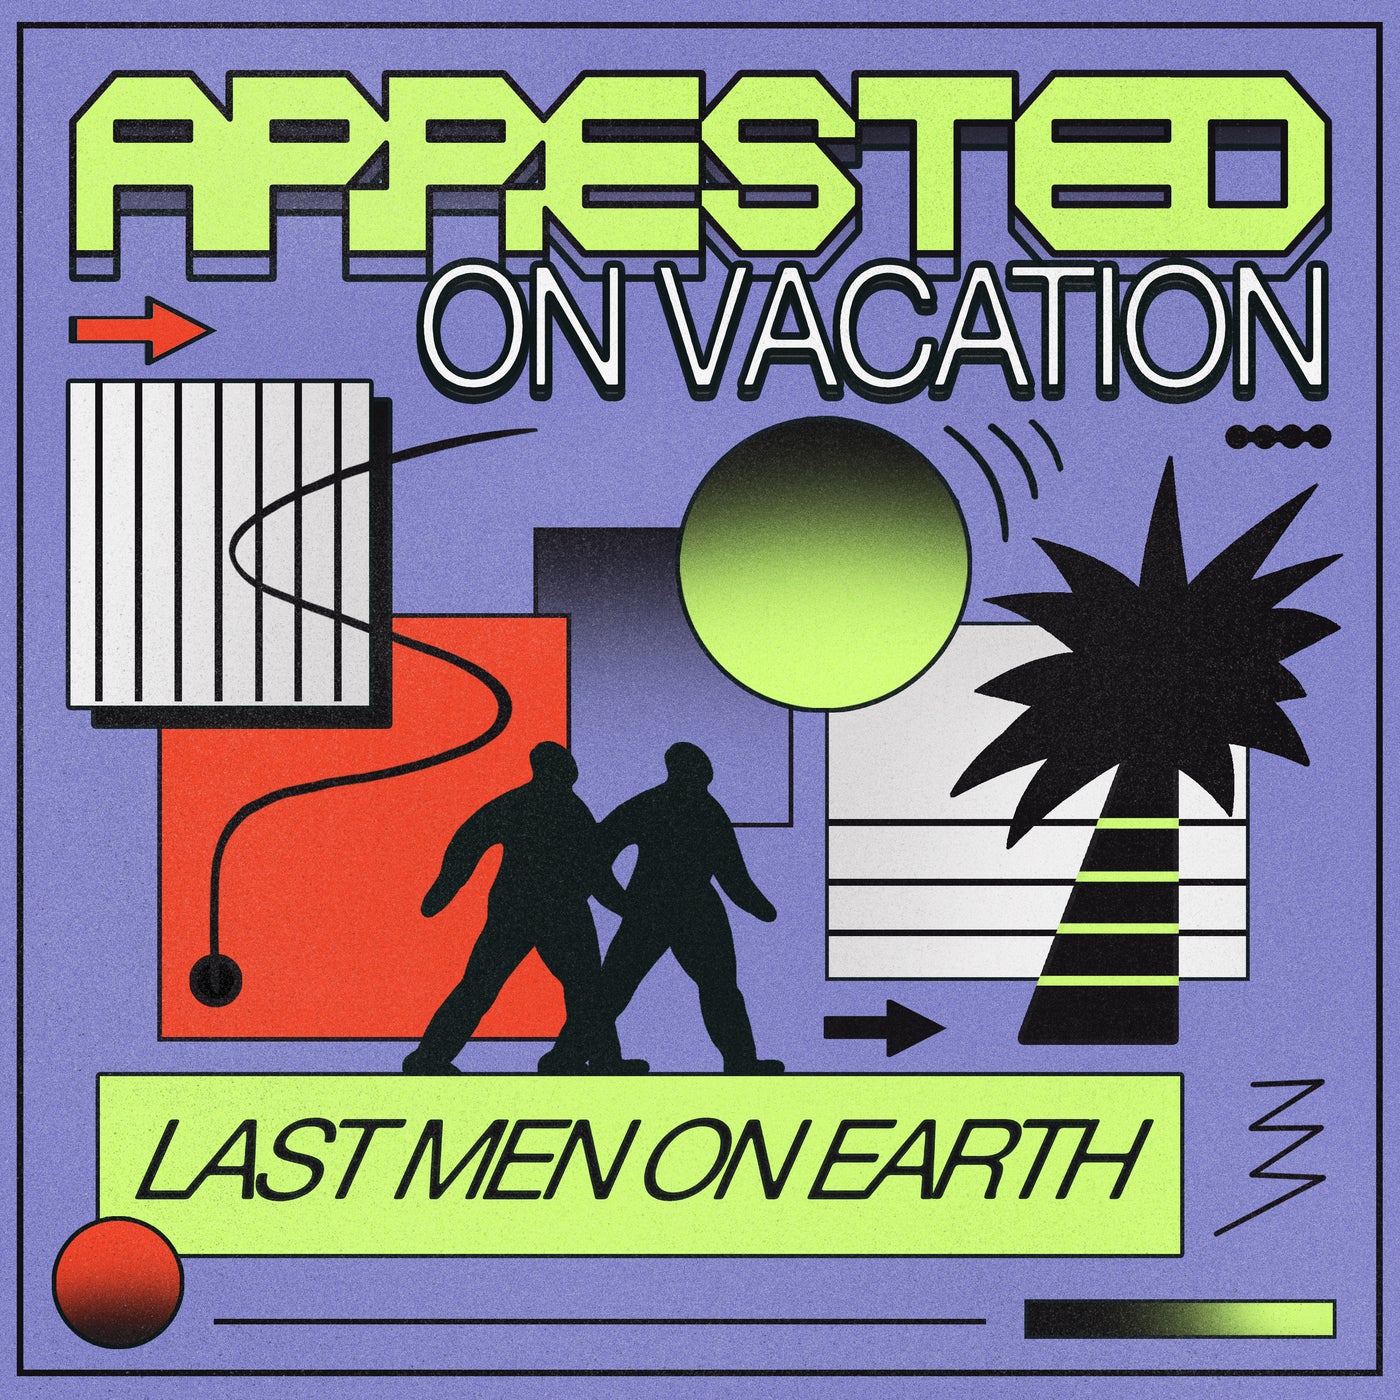 image cover: Last Men On Earth - Arrested On Vacation EP on Get Physical Music